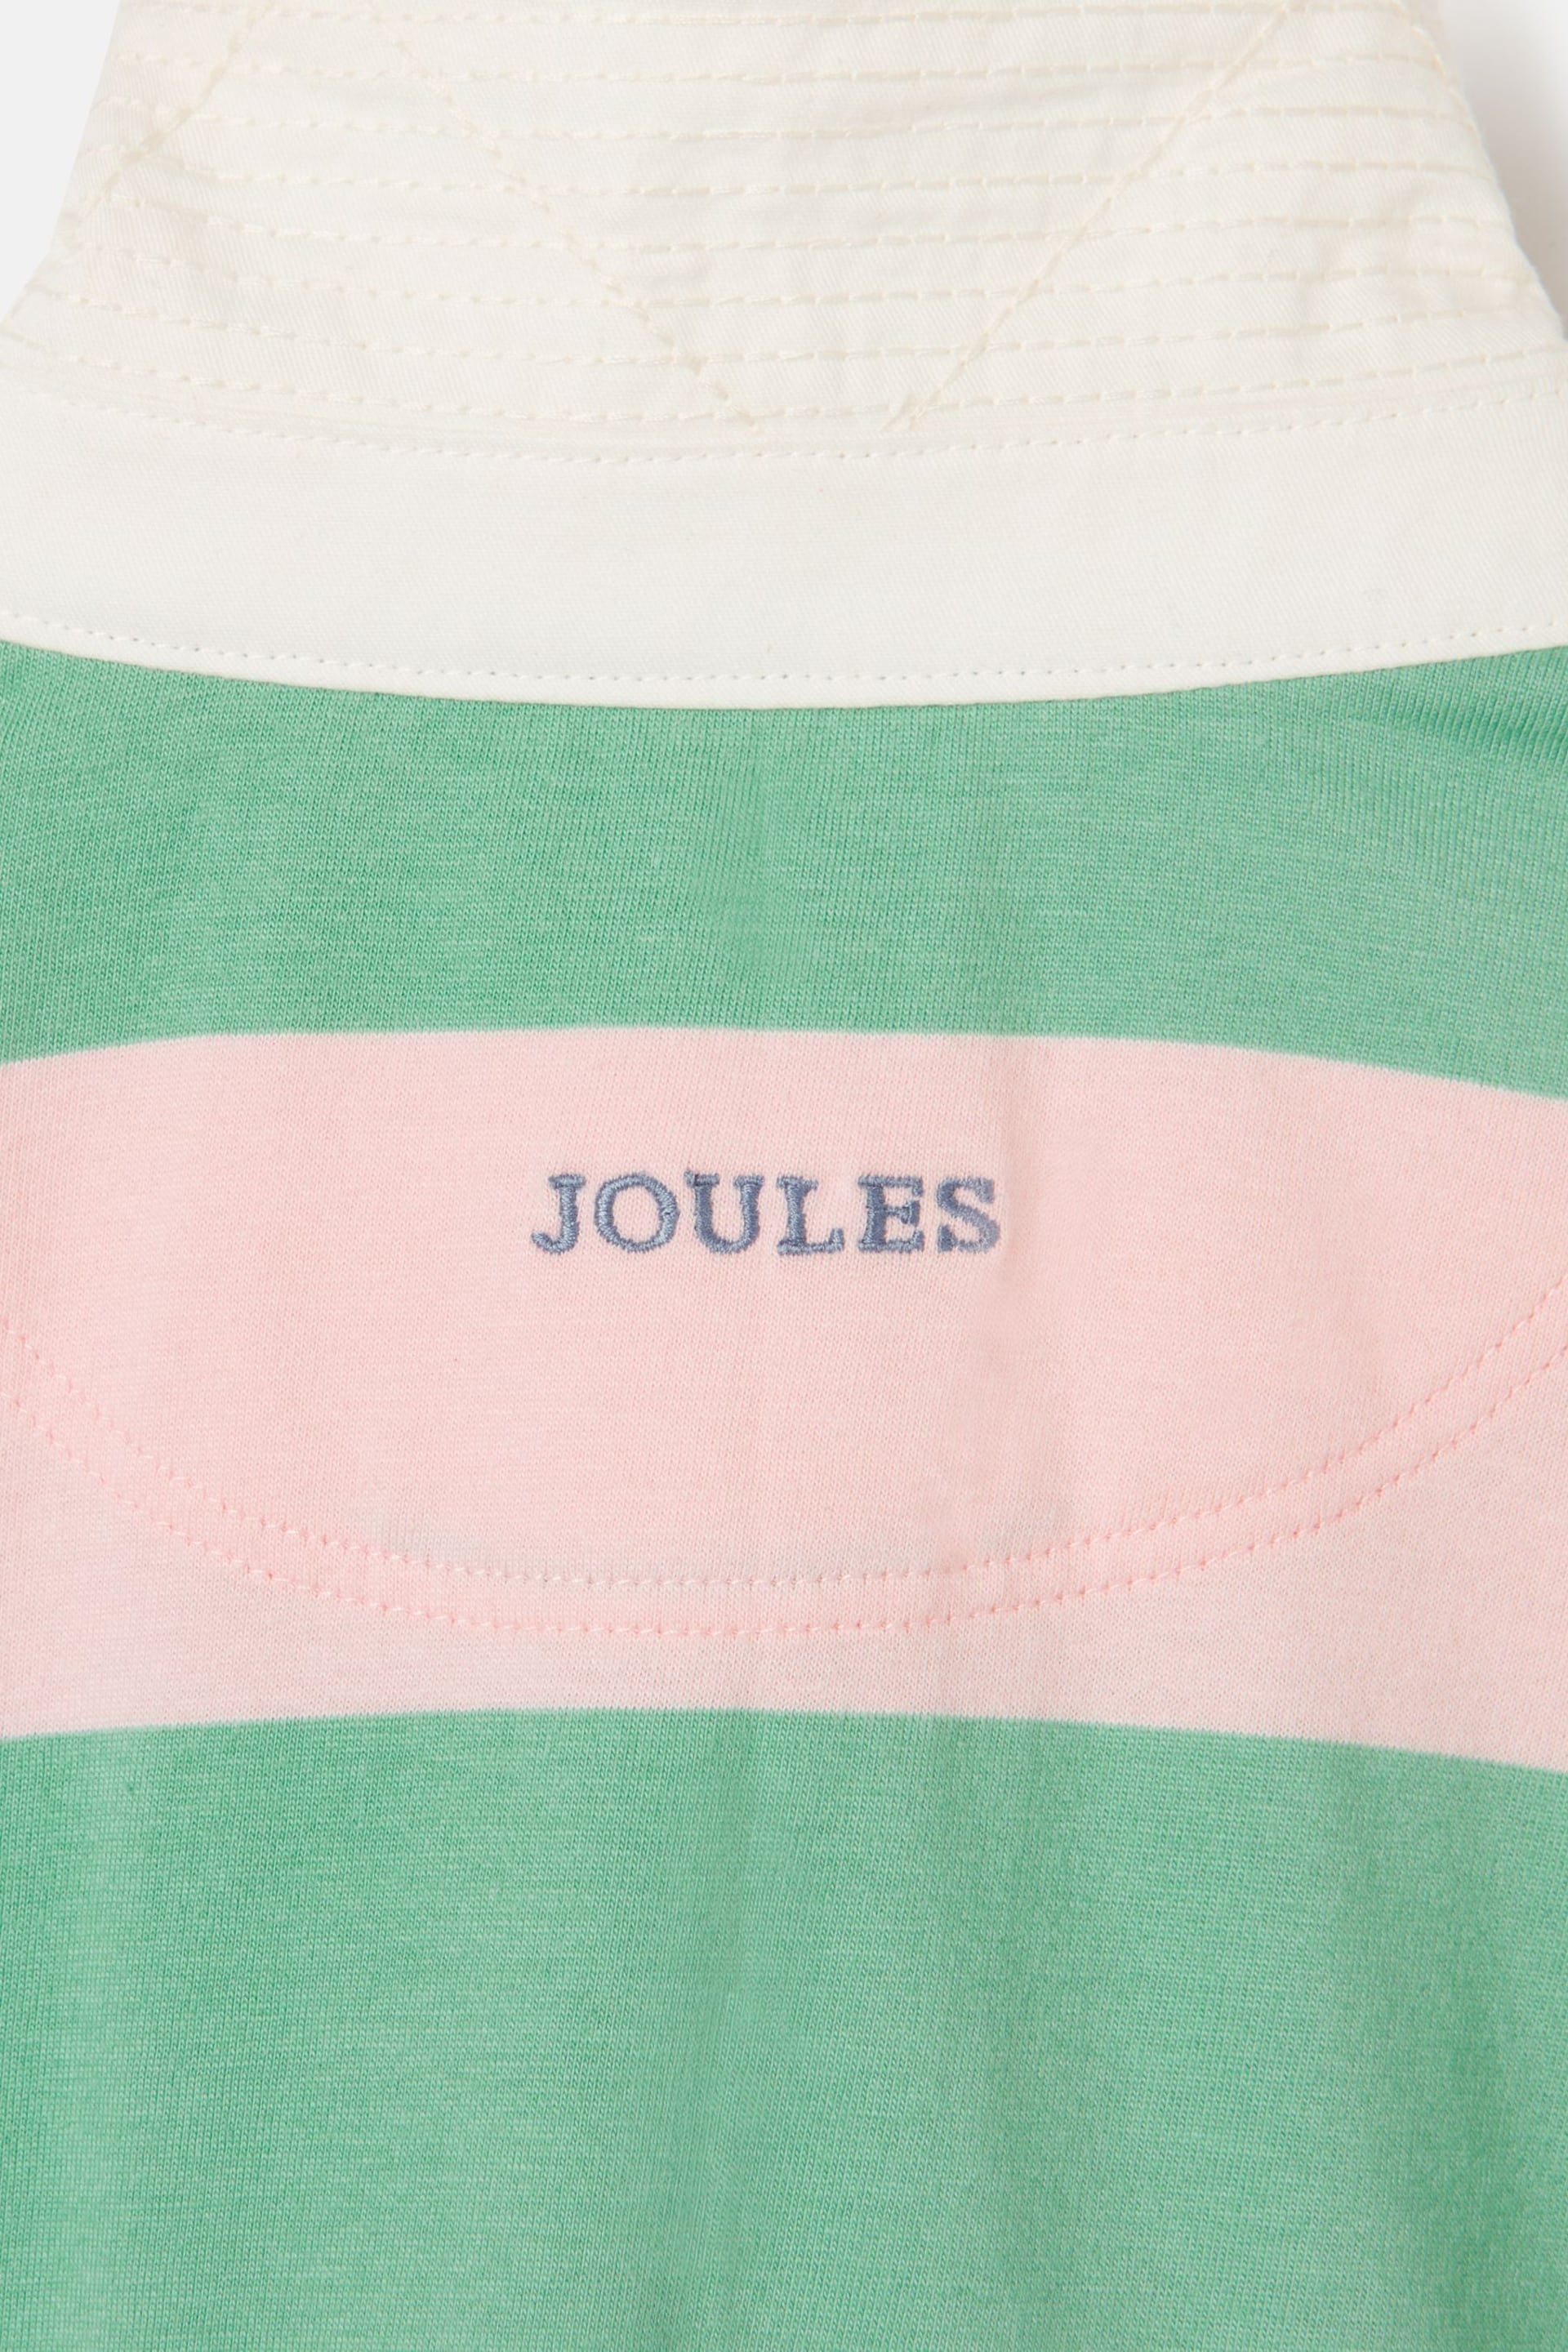 Joules Emmie Multi Striped Jersey Rugby Dress - Image 11 of 11